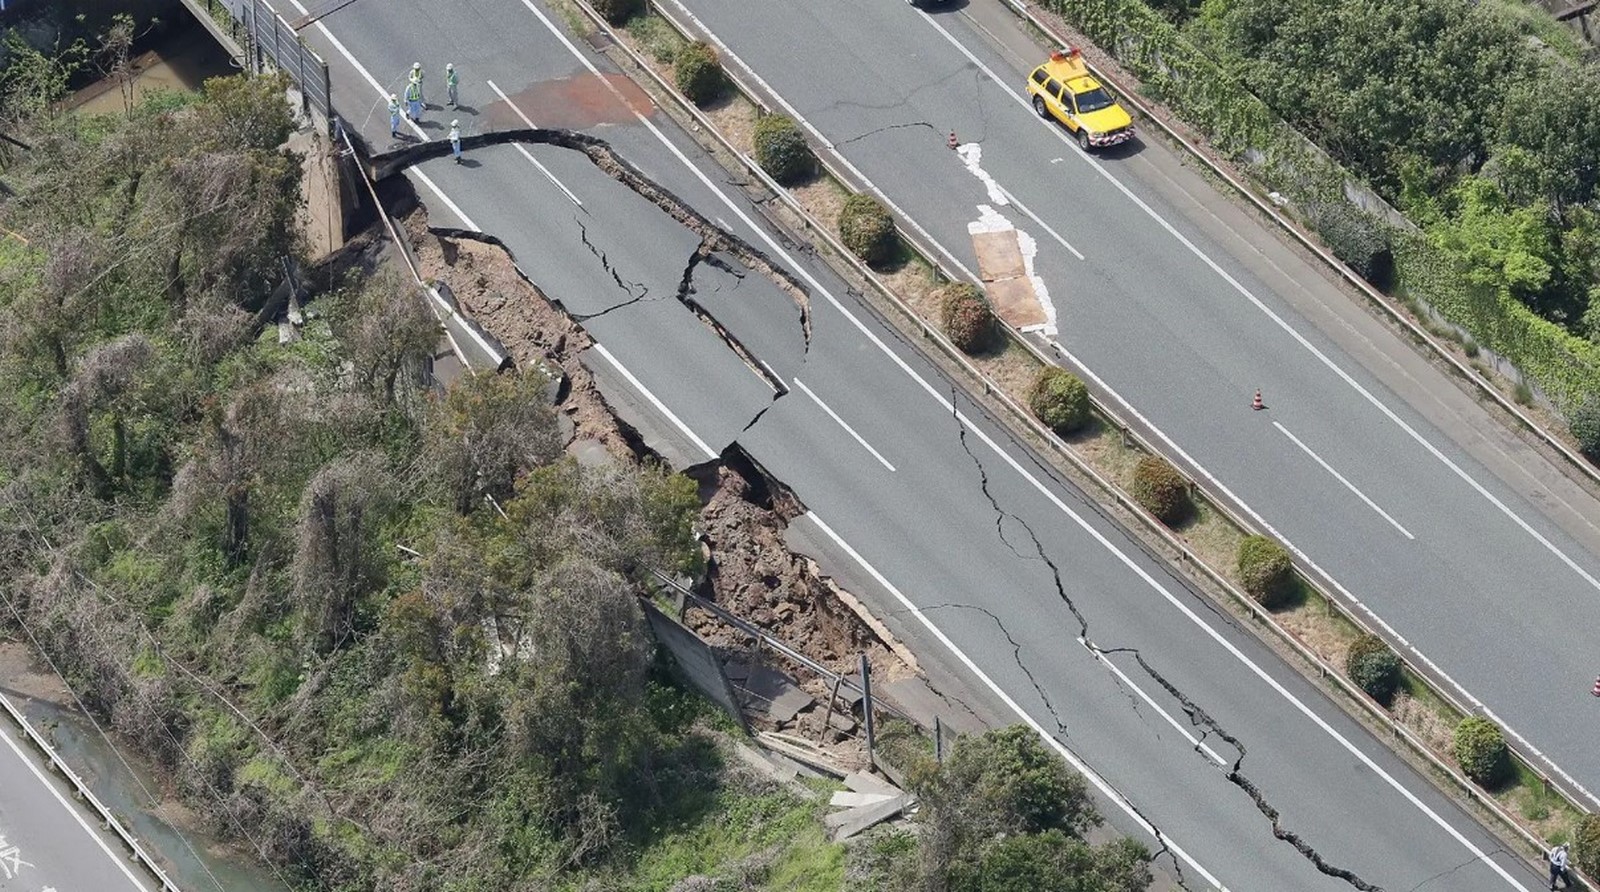 Lessons Learned from Japan's Earthquakes - Sheet4